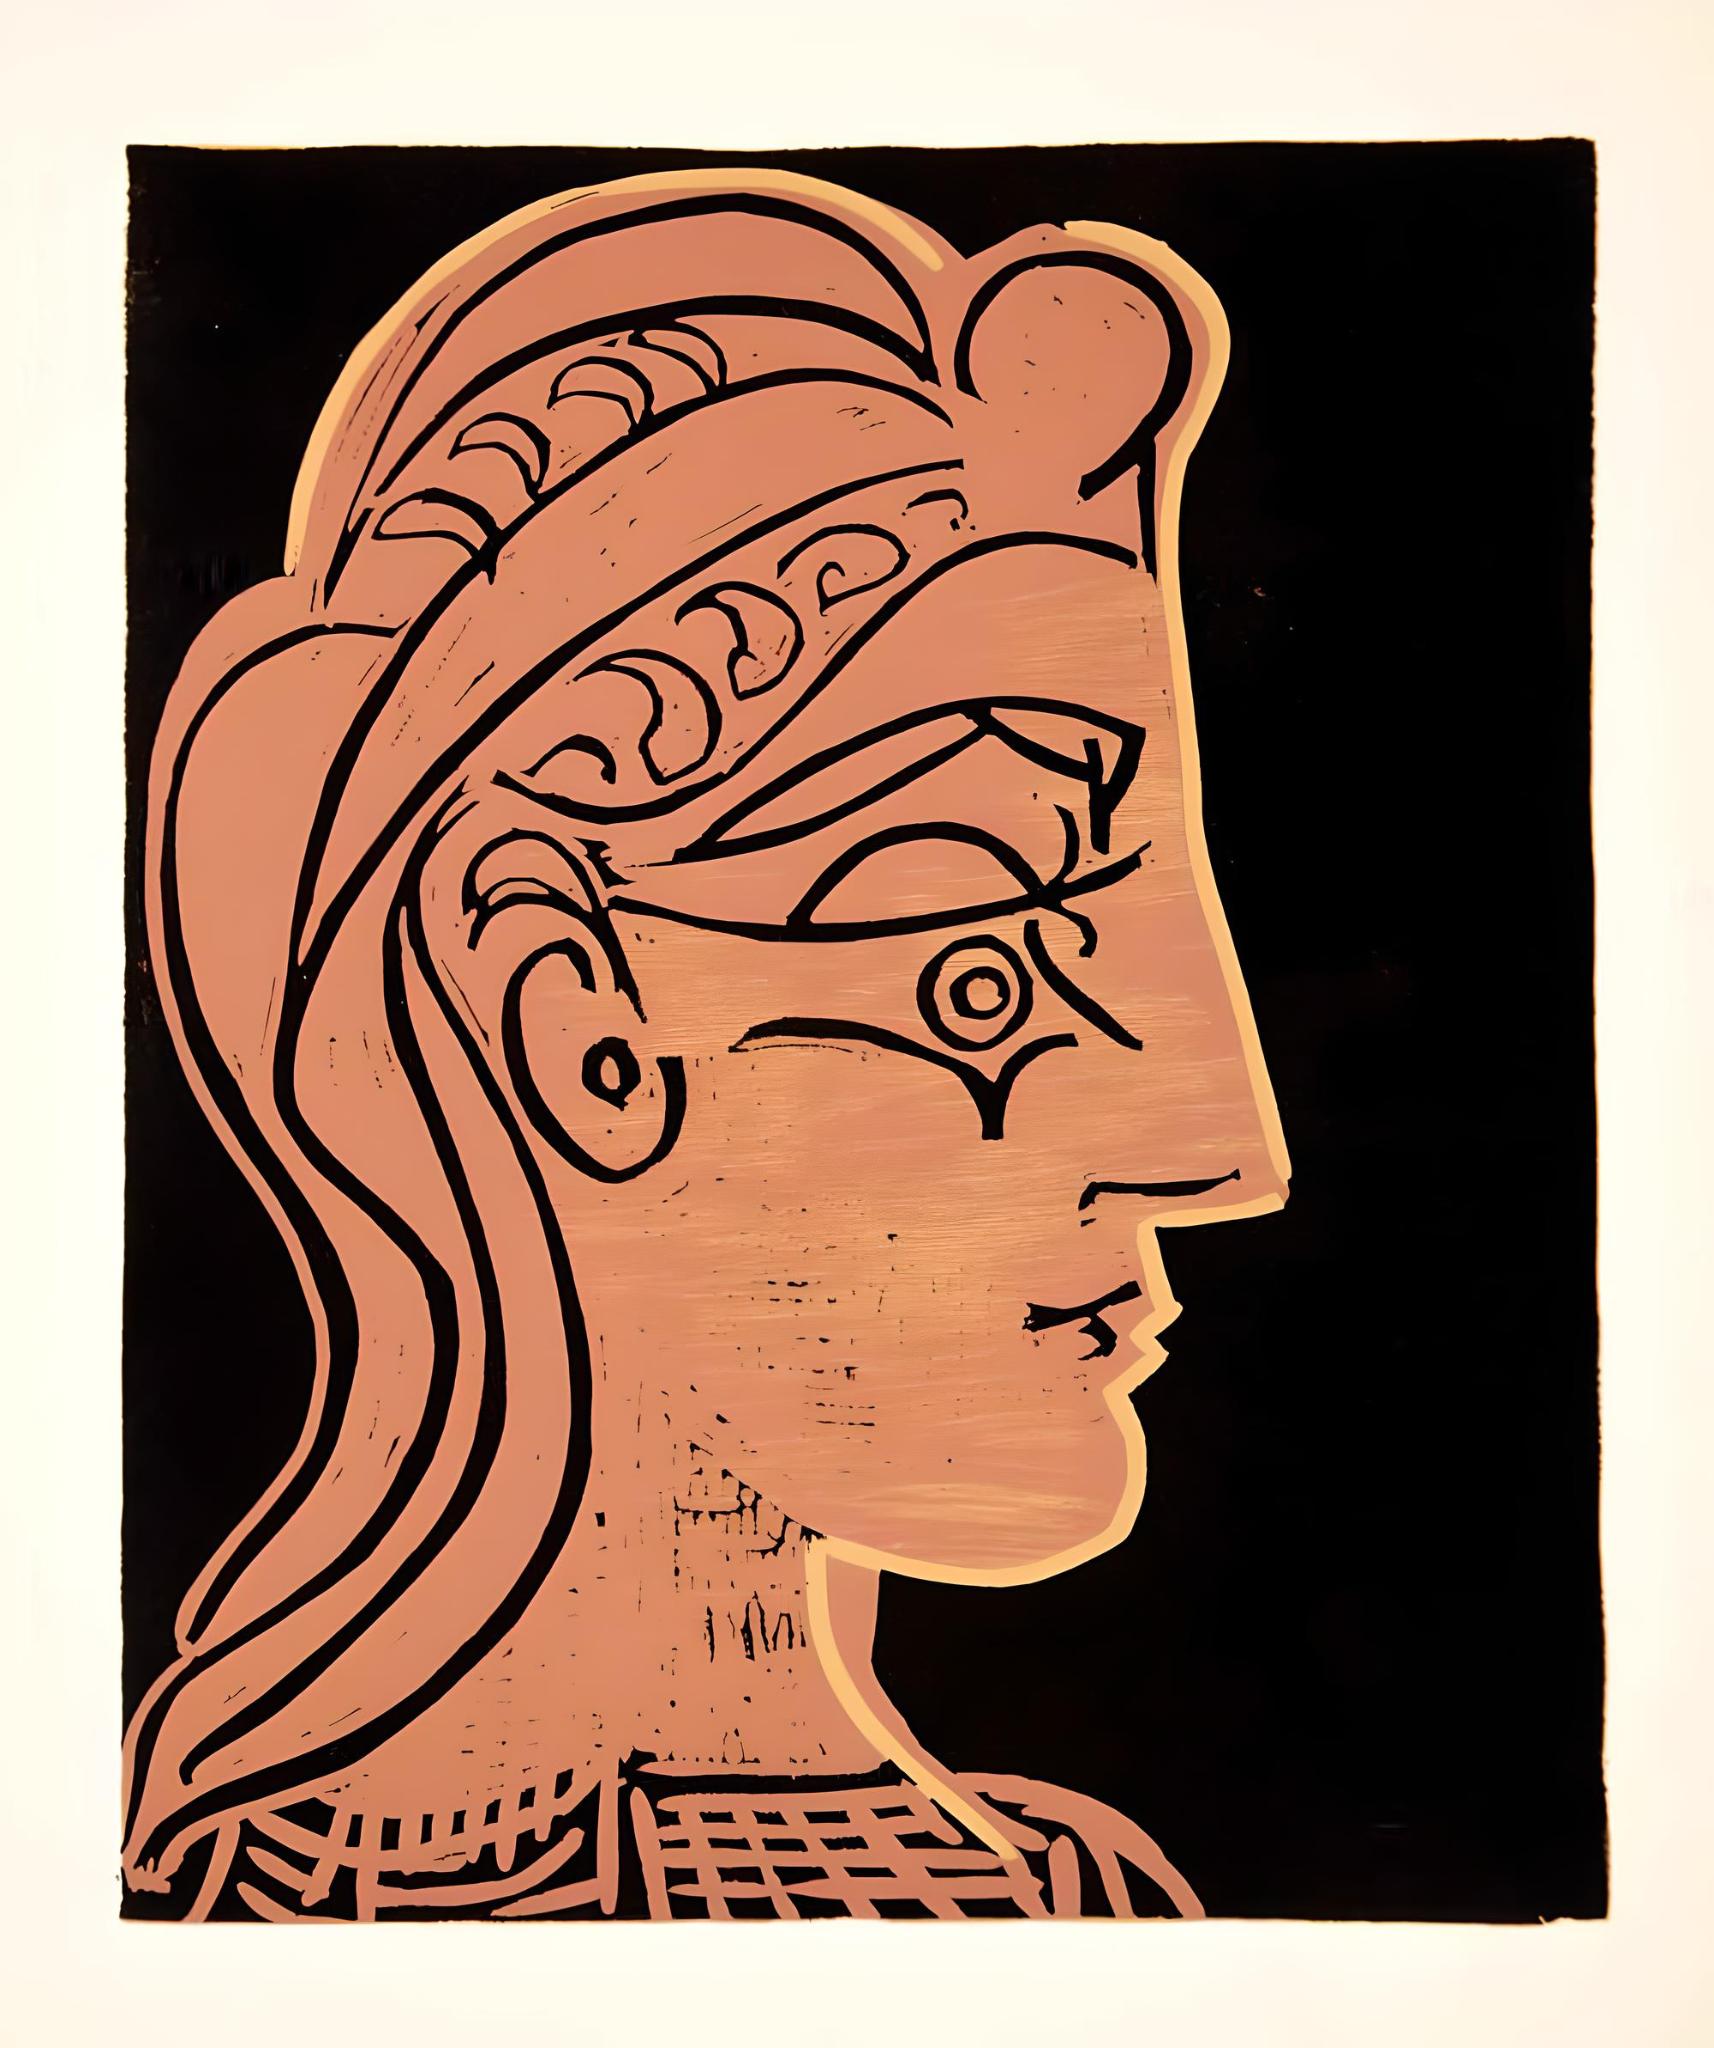 Linocut on wove paper. Inscription: Unsigned and unnumbered, as issued. Good condition; unframed. Notes: From the volume, Pablo Picasso: Linogravures. Published by Éditions Cercle d'Art, Paris; printed by Verlag Gerd Hatje, Stuttgart 1962.

PABLO